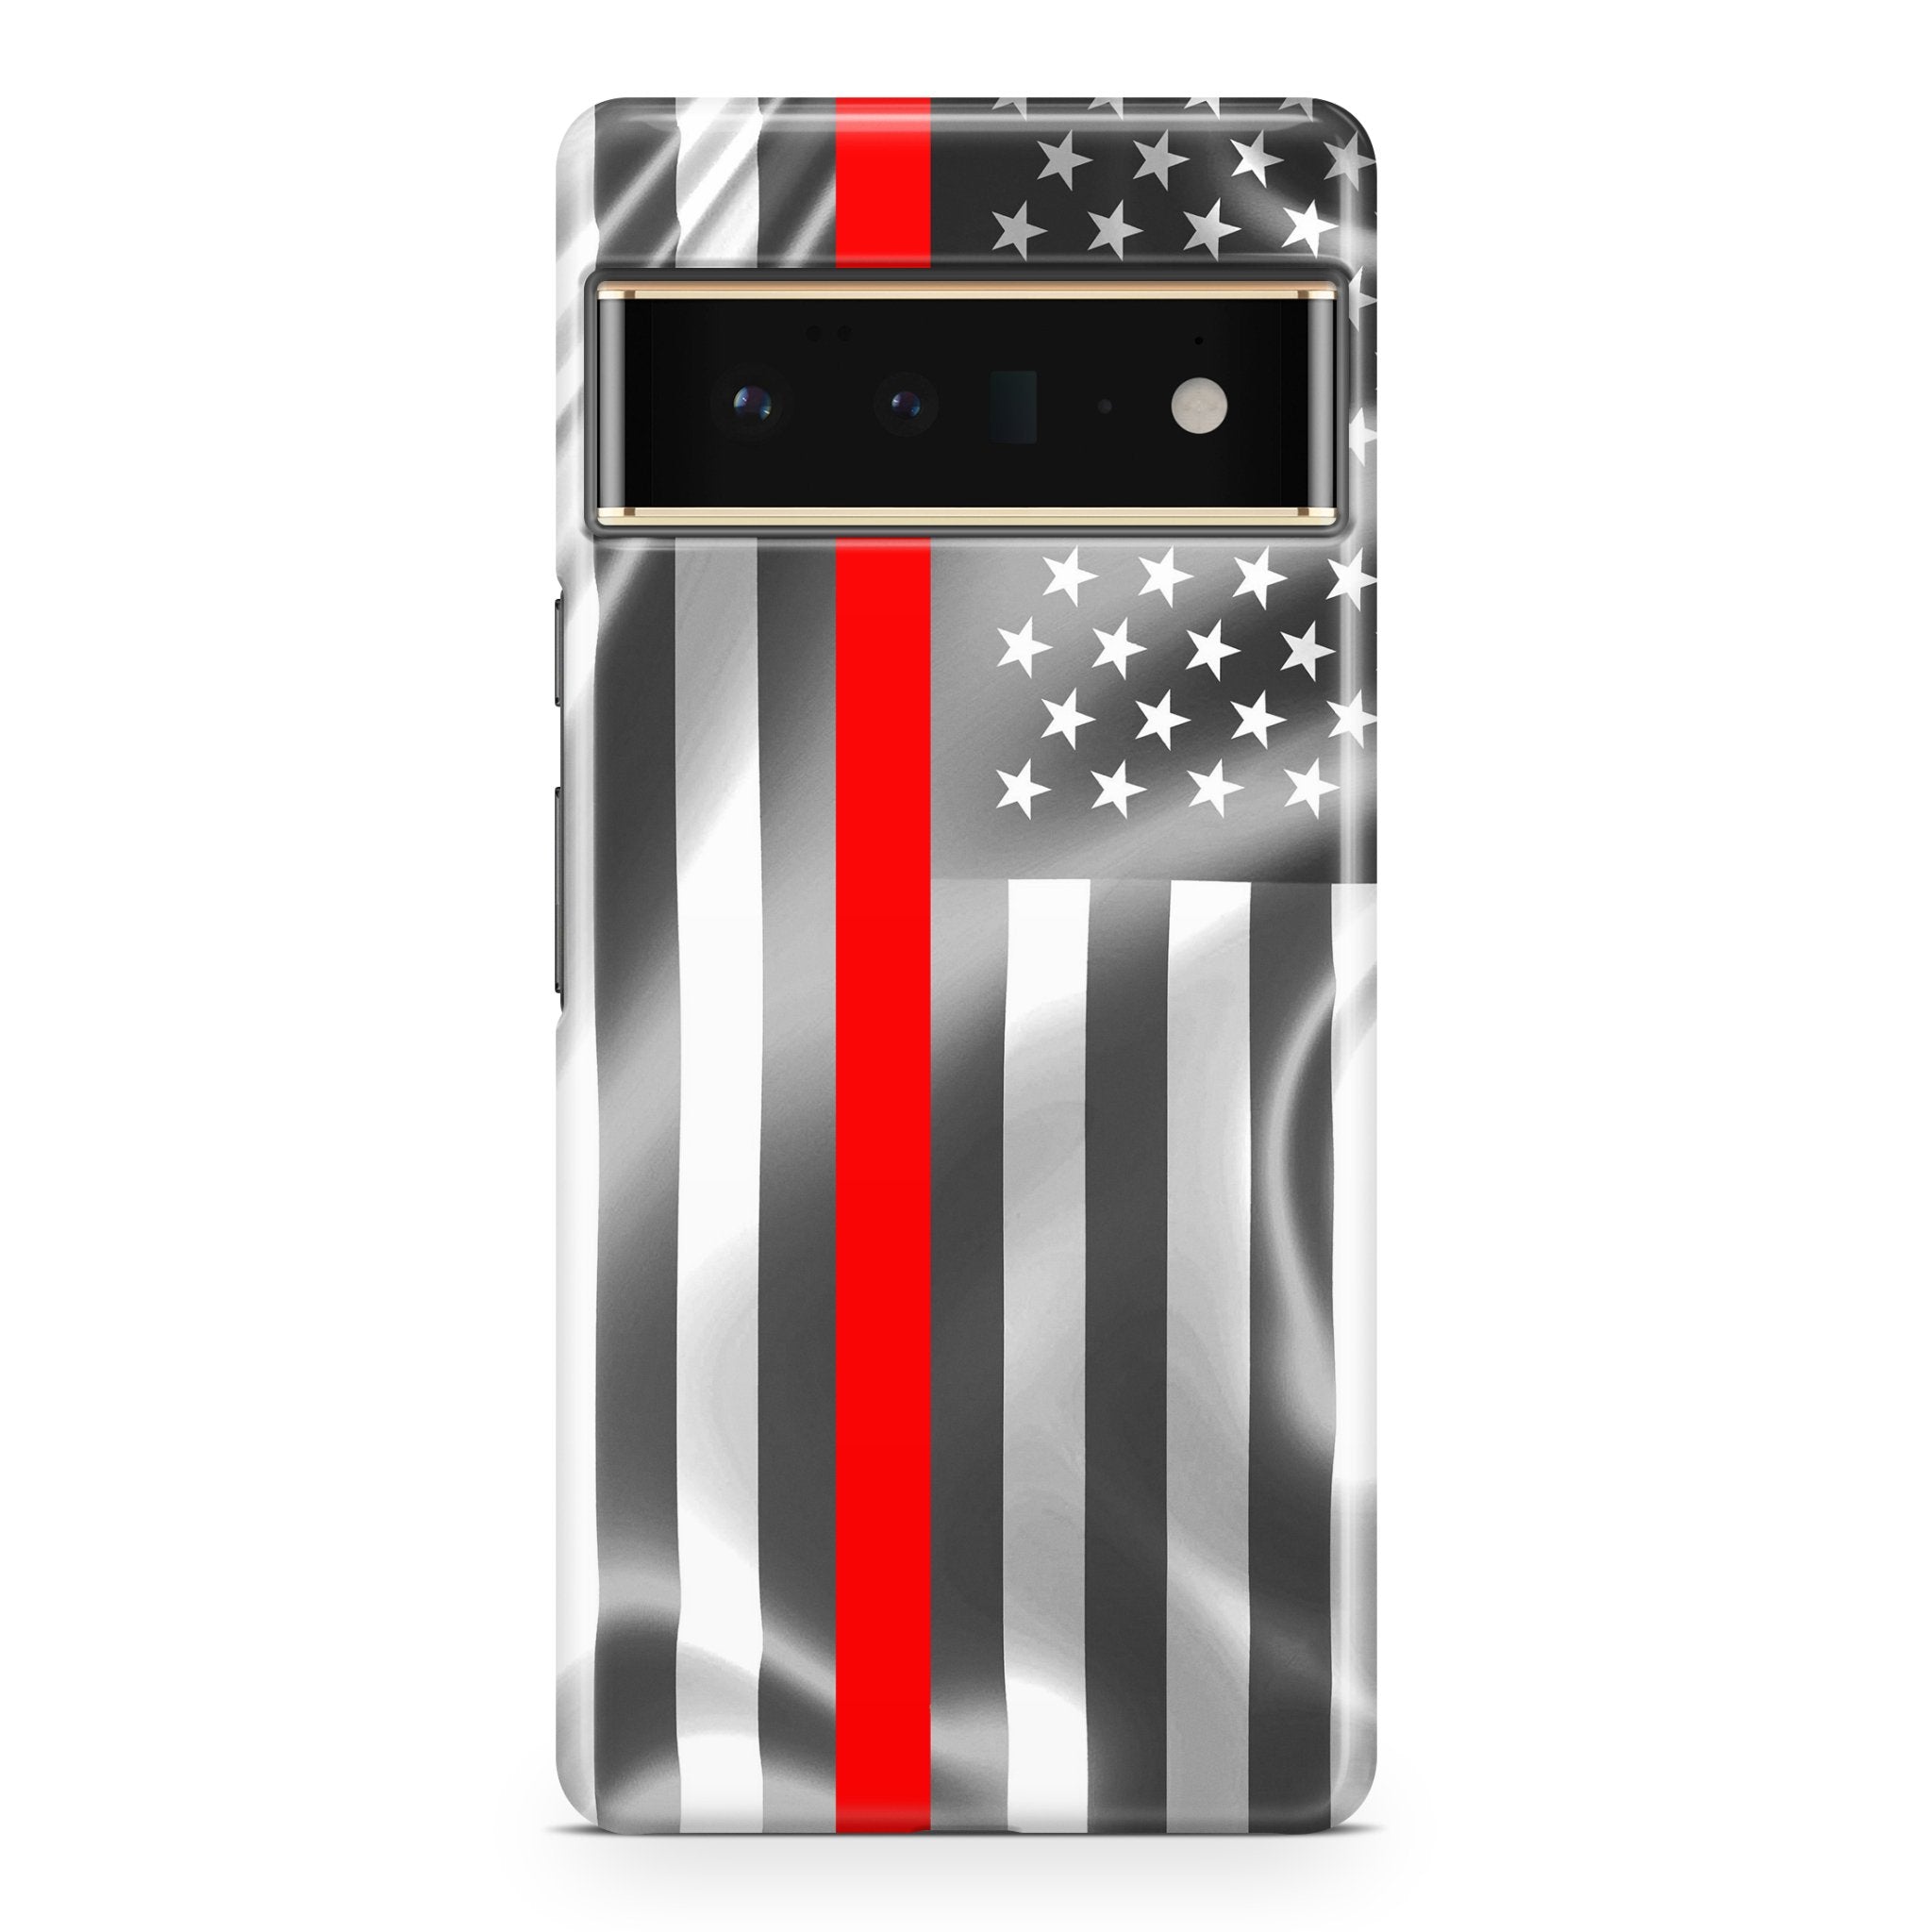 Thin Red Line - Google phone case designs by CaseSwagger